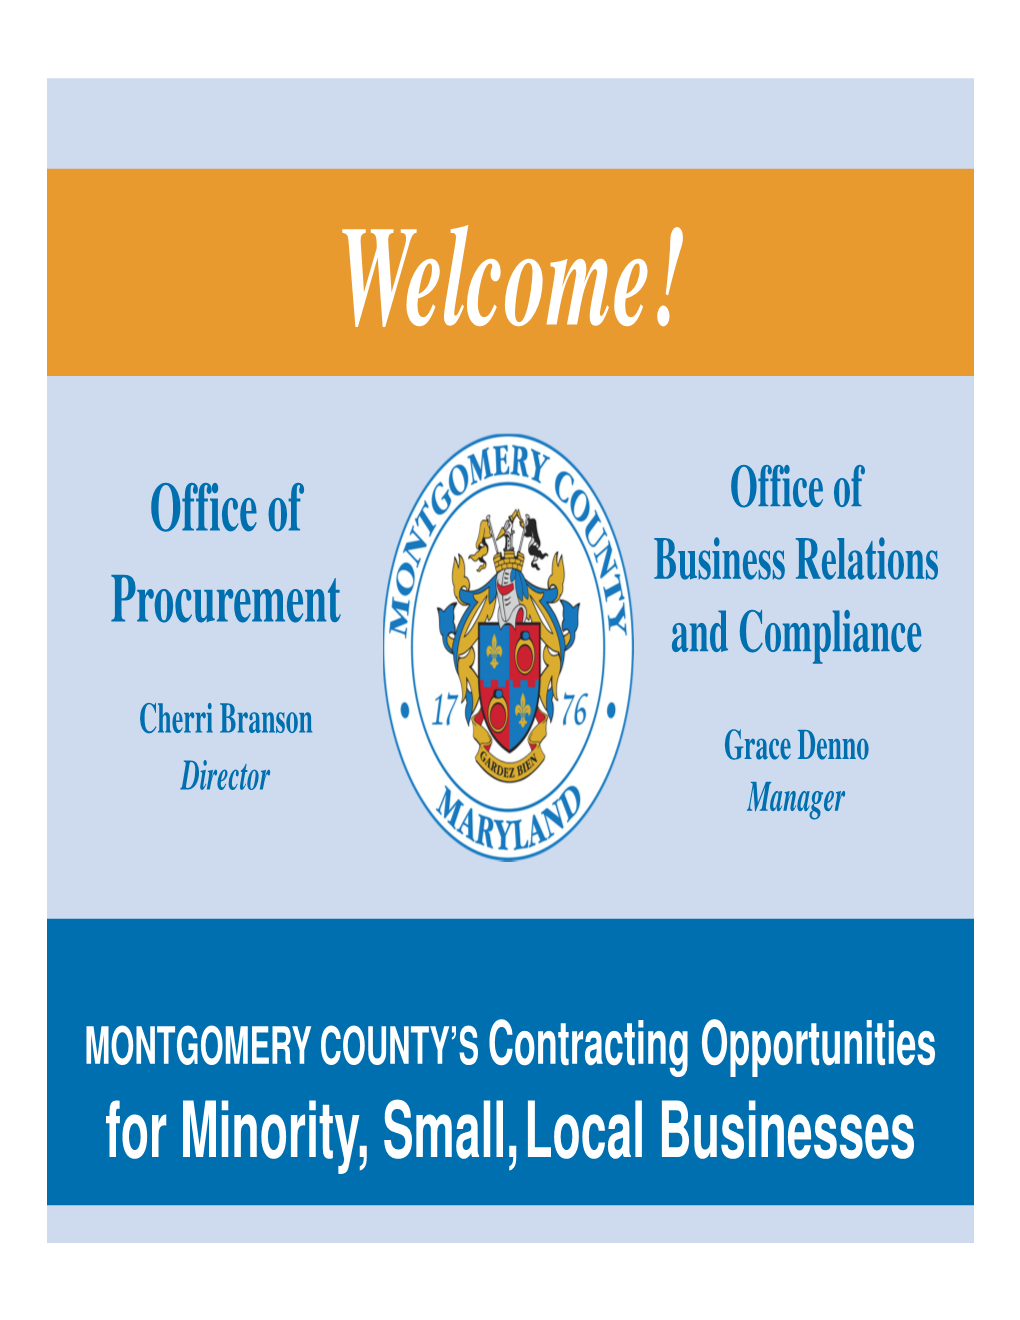 MONTGOMERY COUNTY's Local Small Business Reserve Program